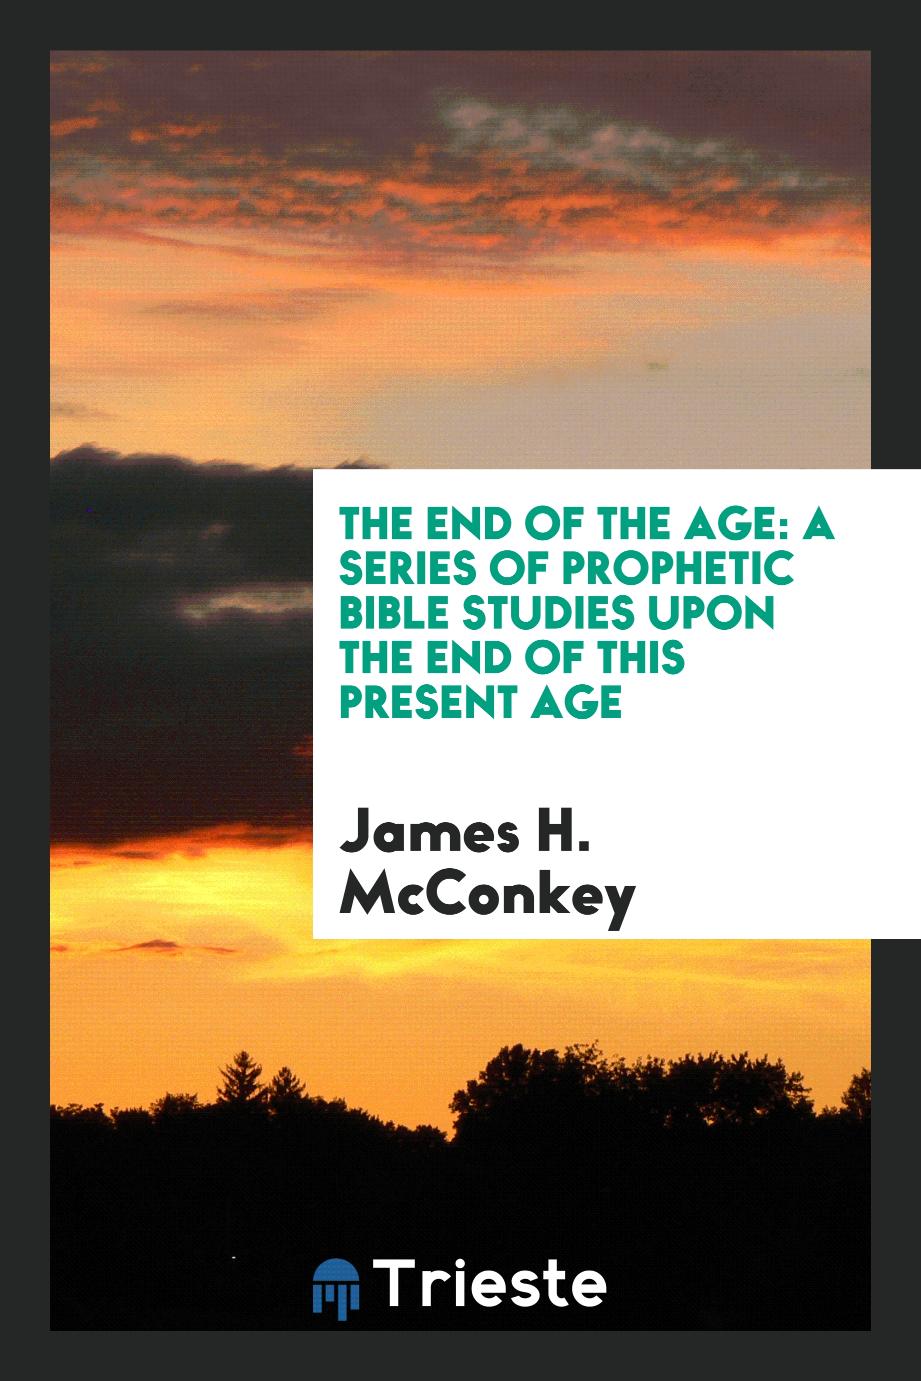 The End of the Age: A Series of Prophetic Bible Studies Upon the End of this Present Age